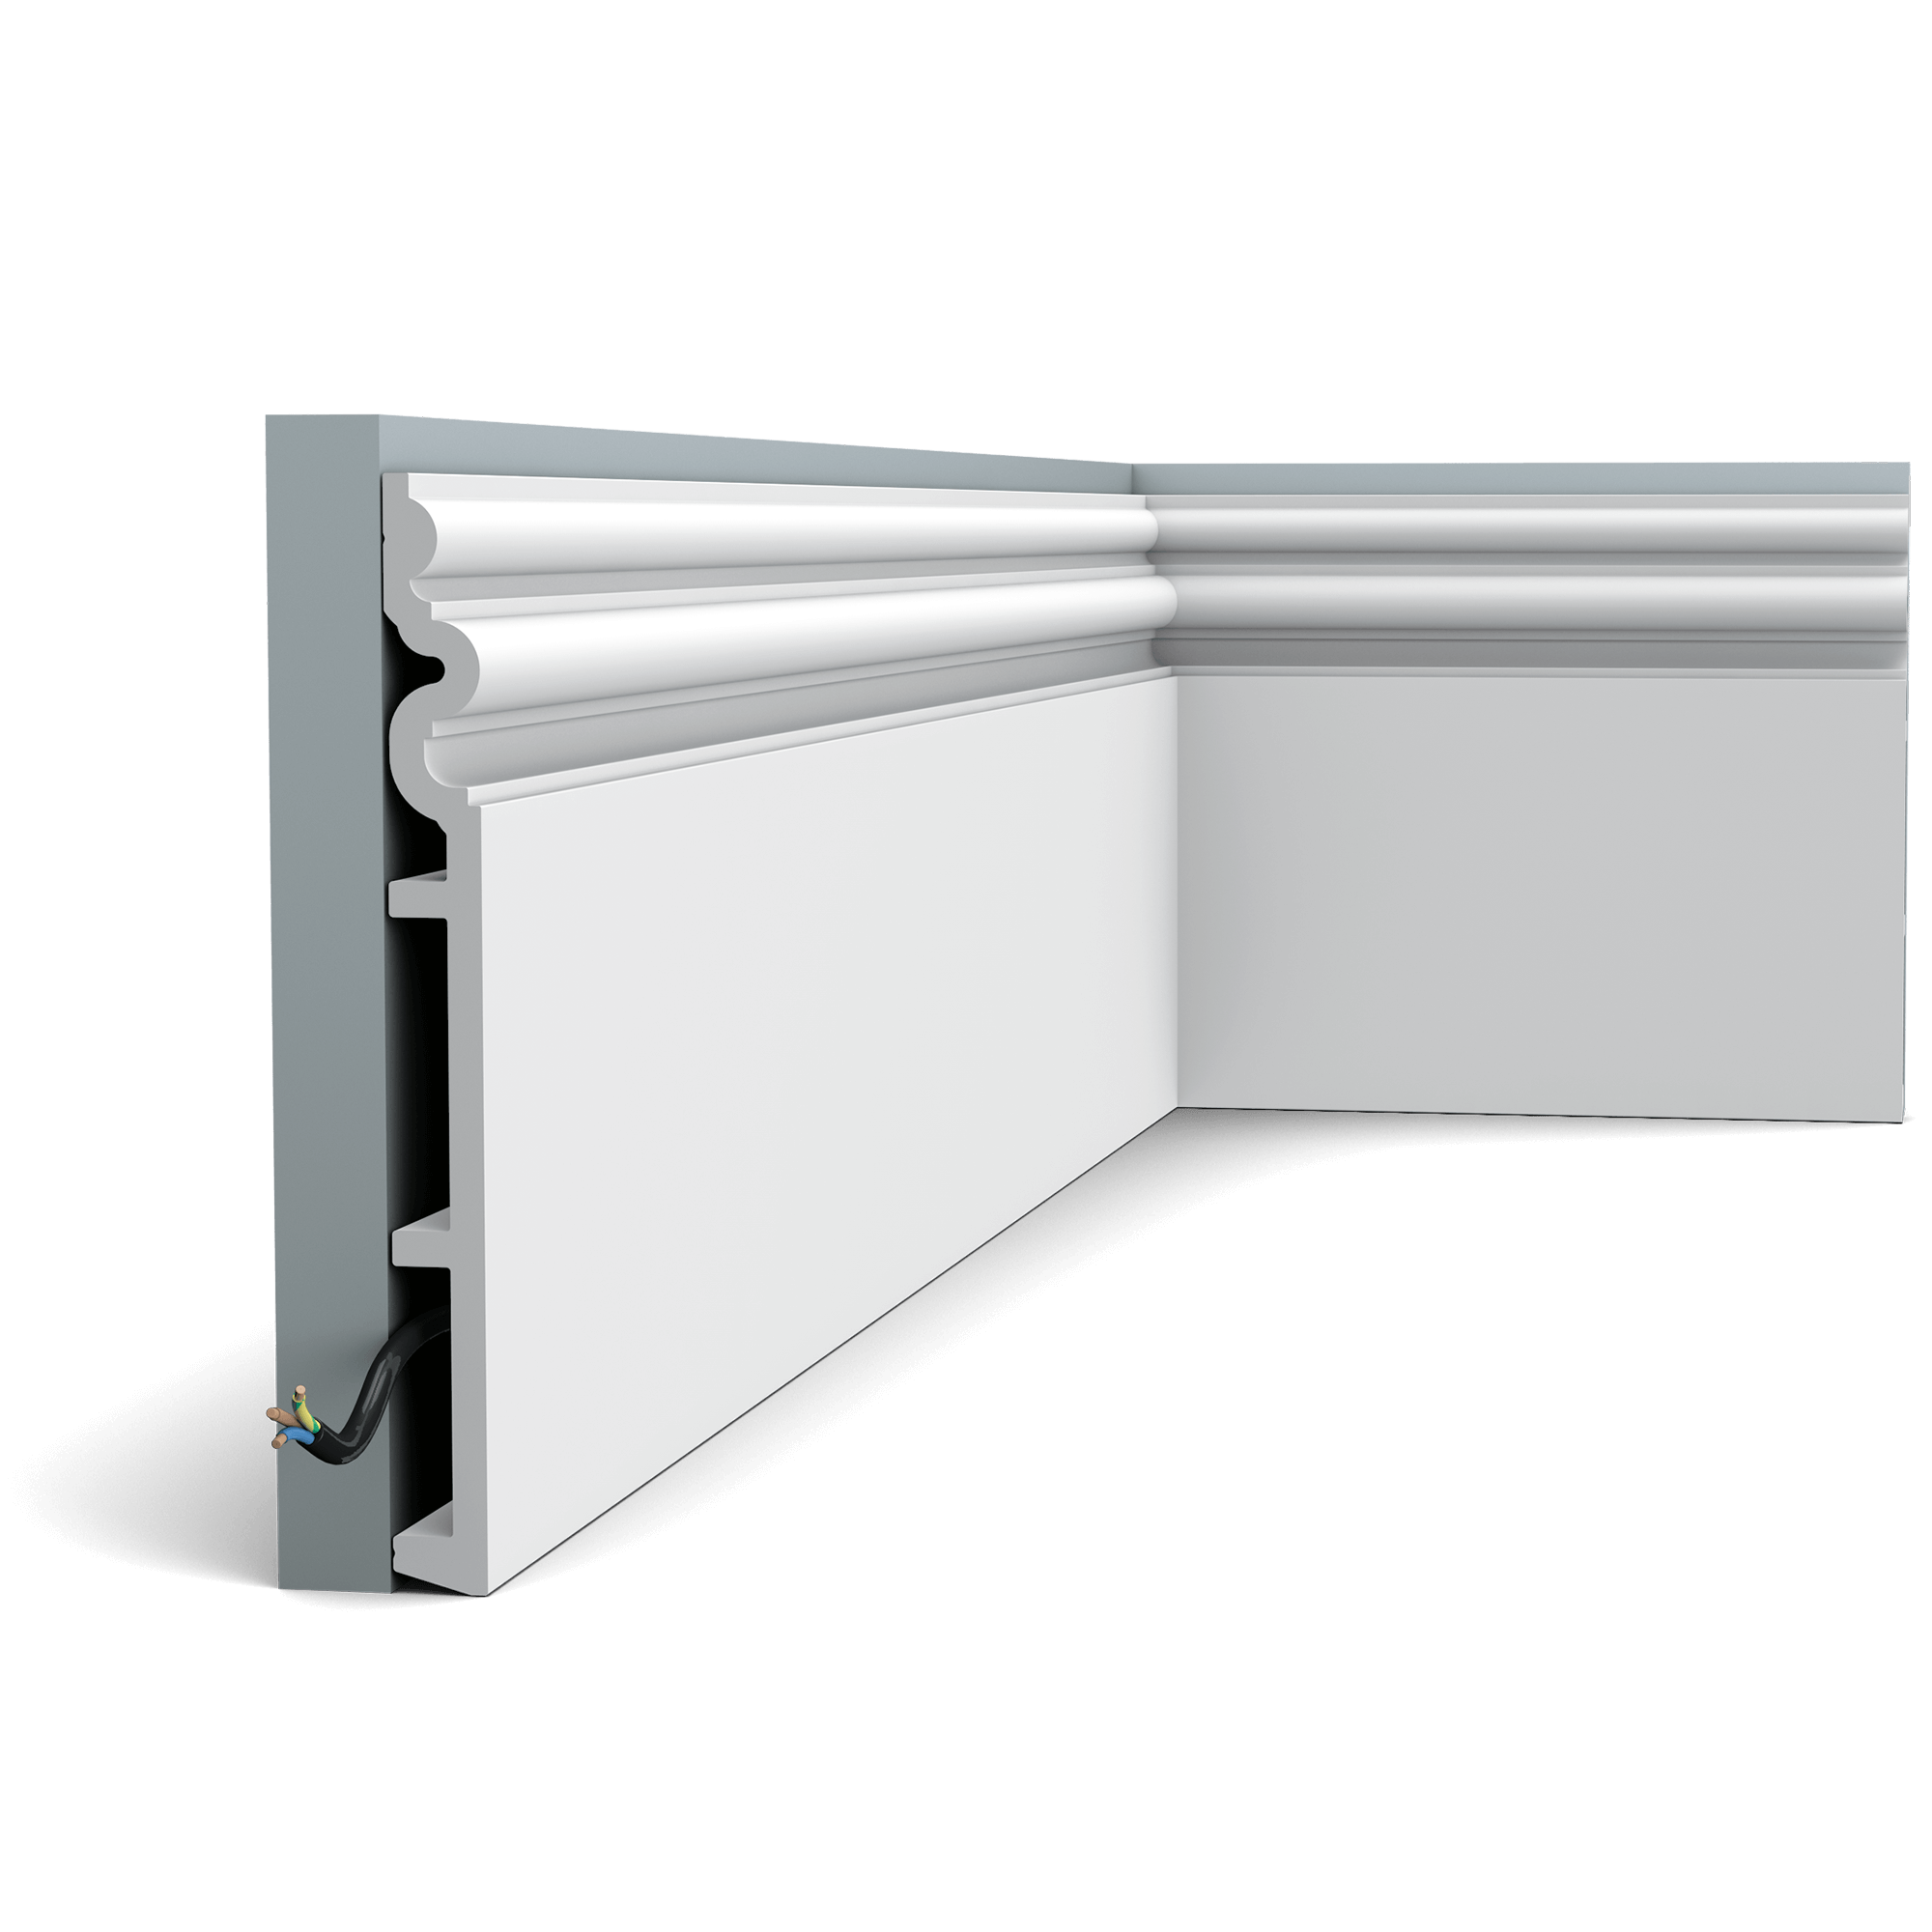 The SX193 skirting board is part of the AUTOIRE family. This 25 cm high majestic footing will fit perfectly in a classic interior and will guarantee a glamorous transition between floor and wall.